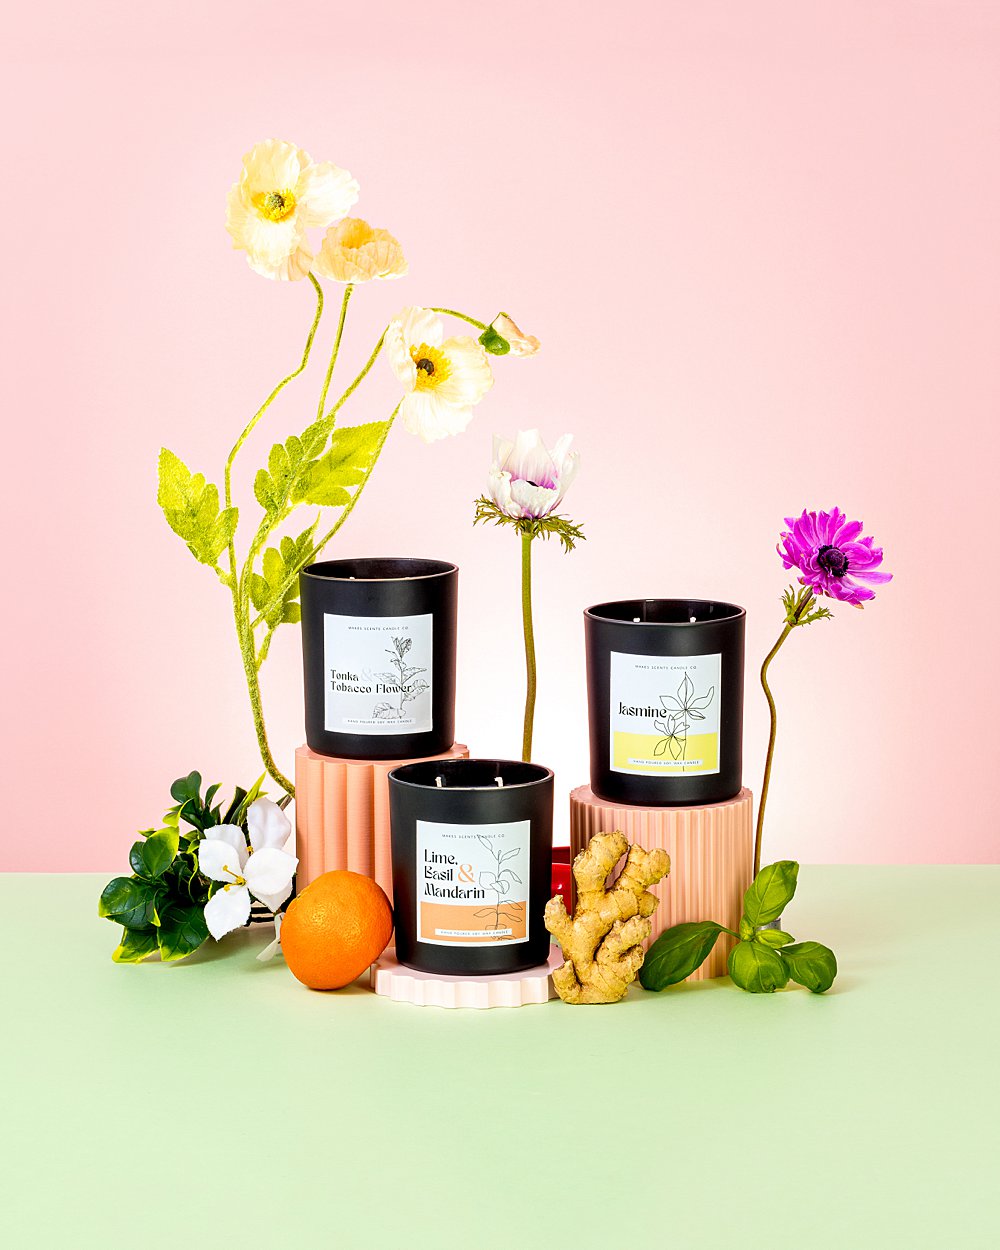 Colourful floral content creation for Makes Scents Studio scented candles. Styled product stills photography by HIYA MARIANNE.